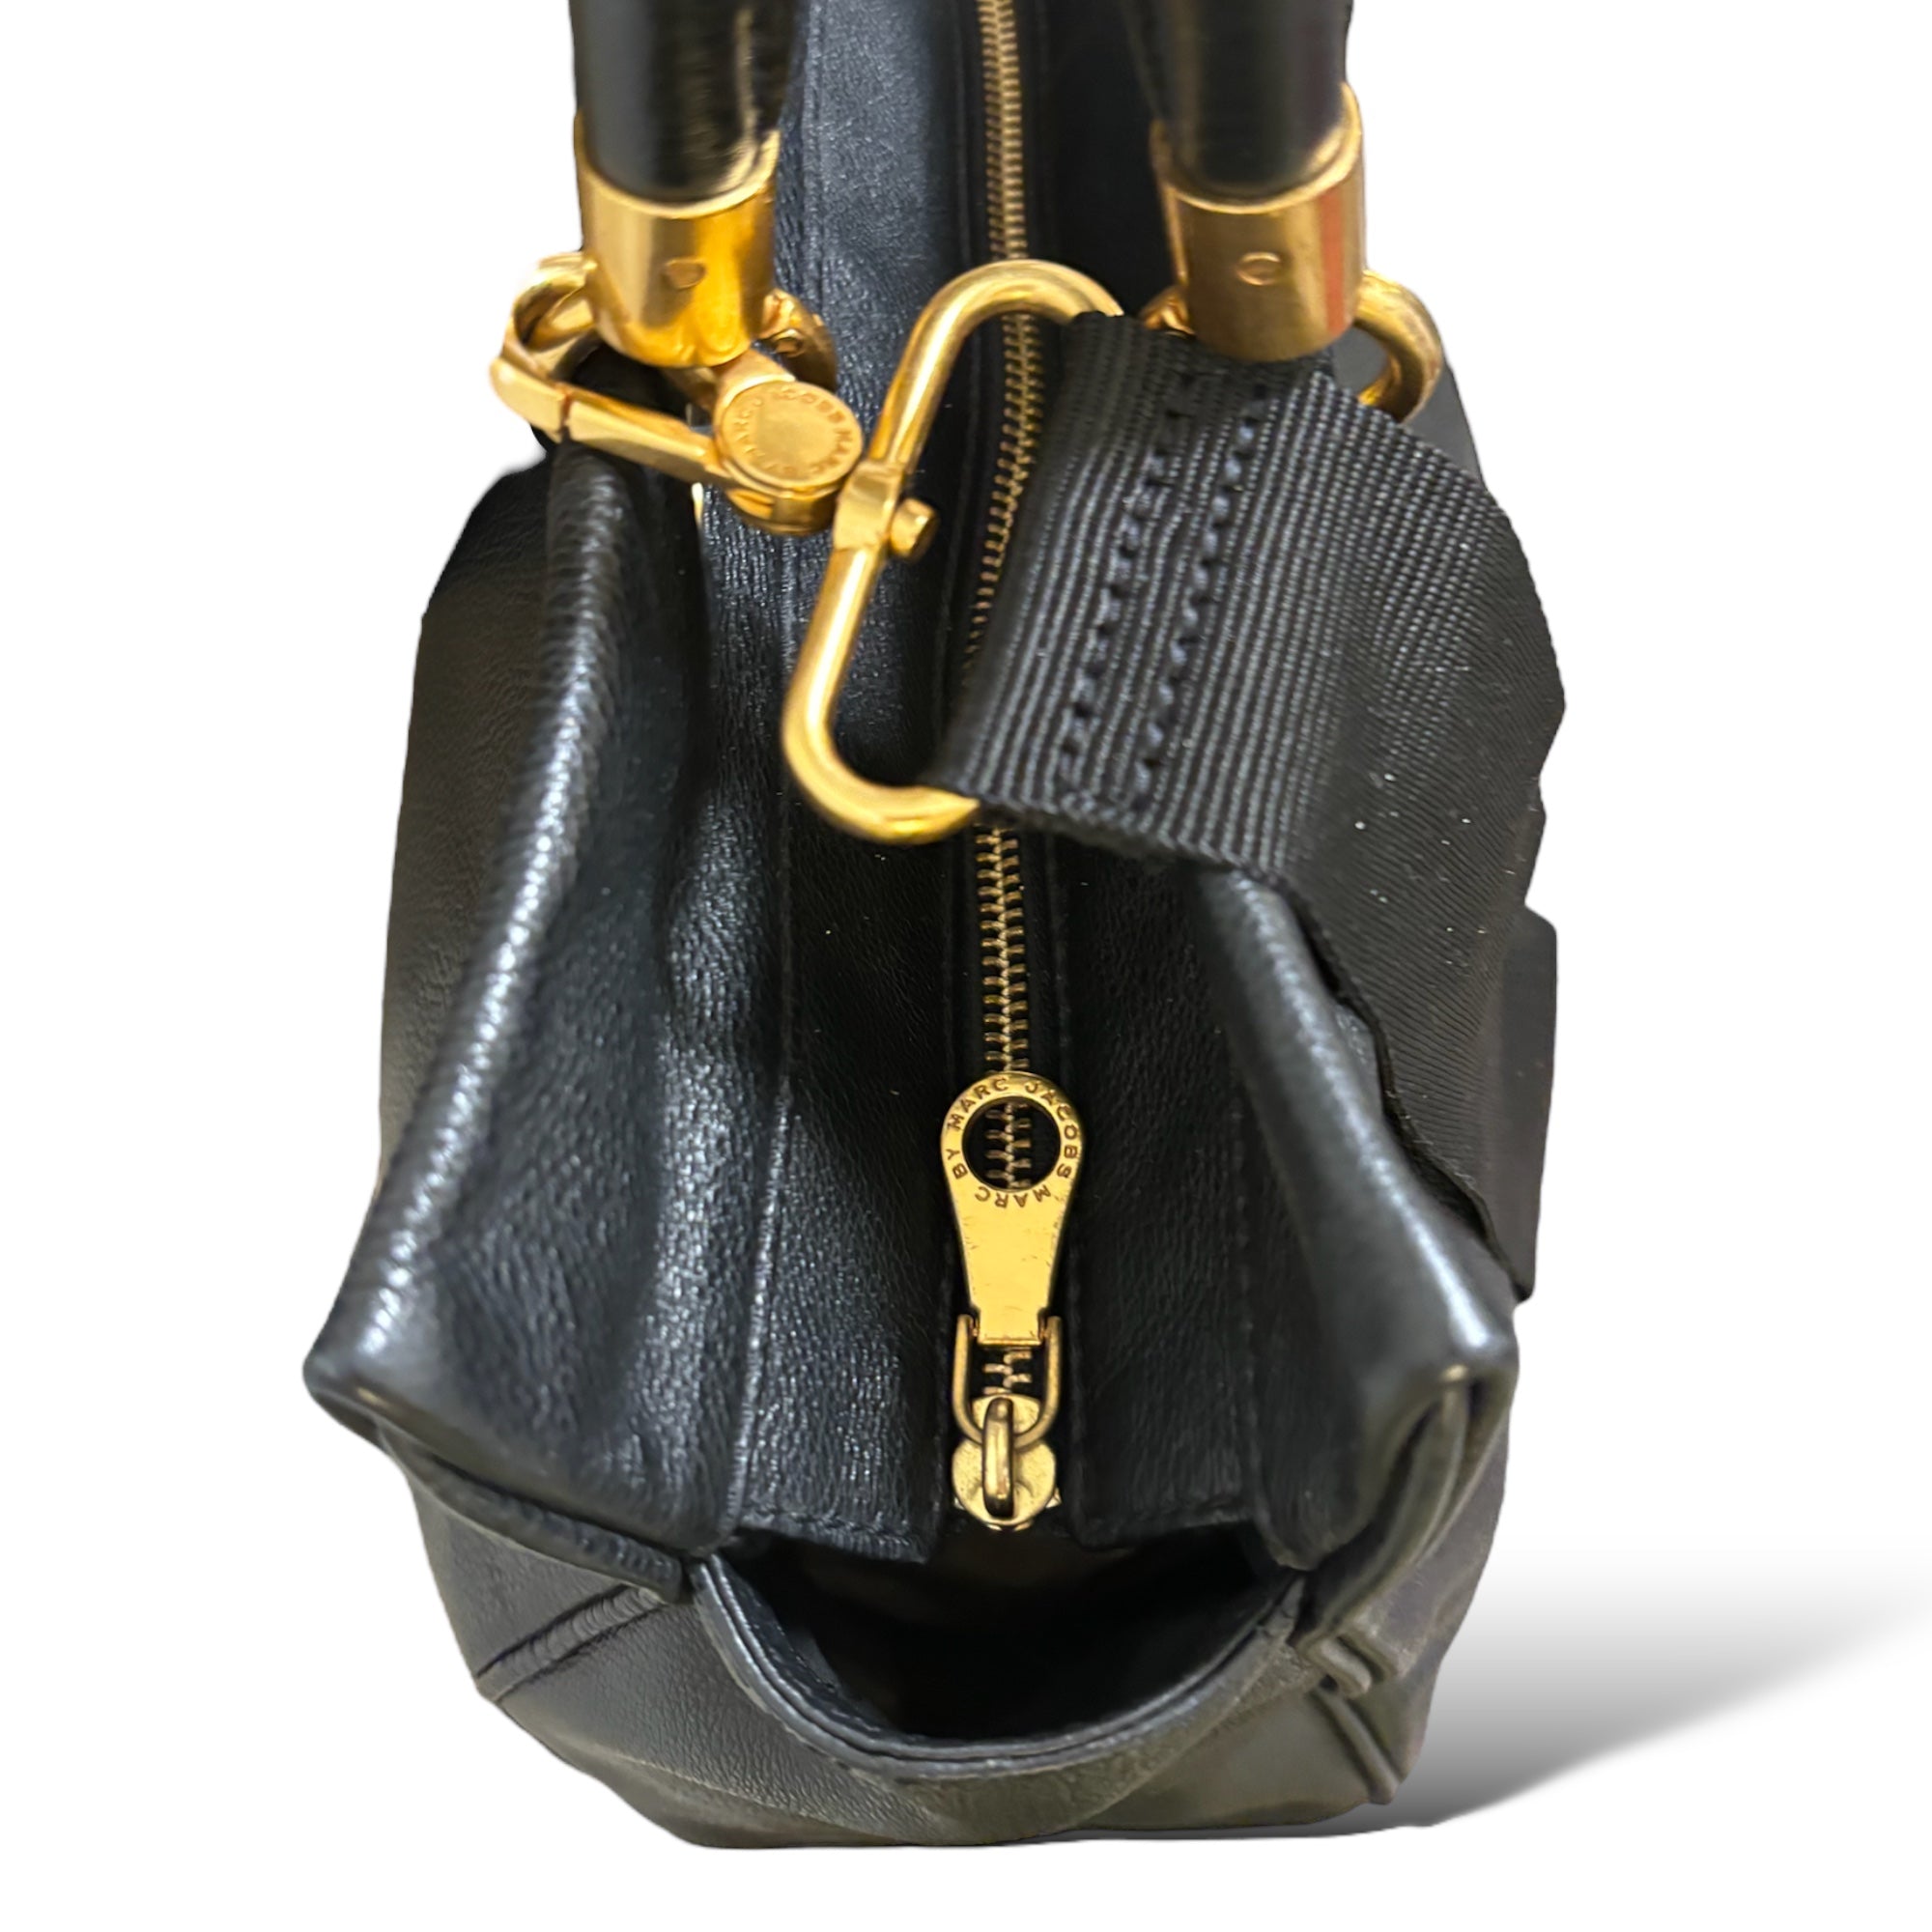 Marc By Marc Jacobs Too Hot To Handle Black/Gold Hardware Leather Tote/Crossbody